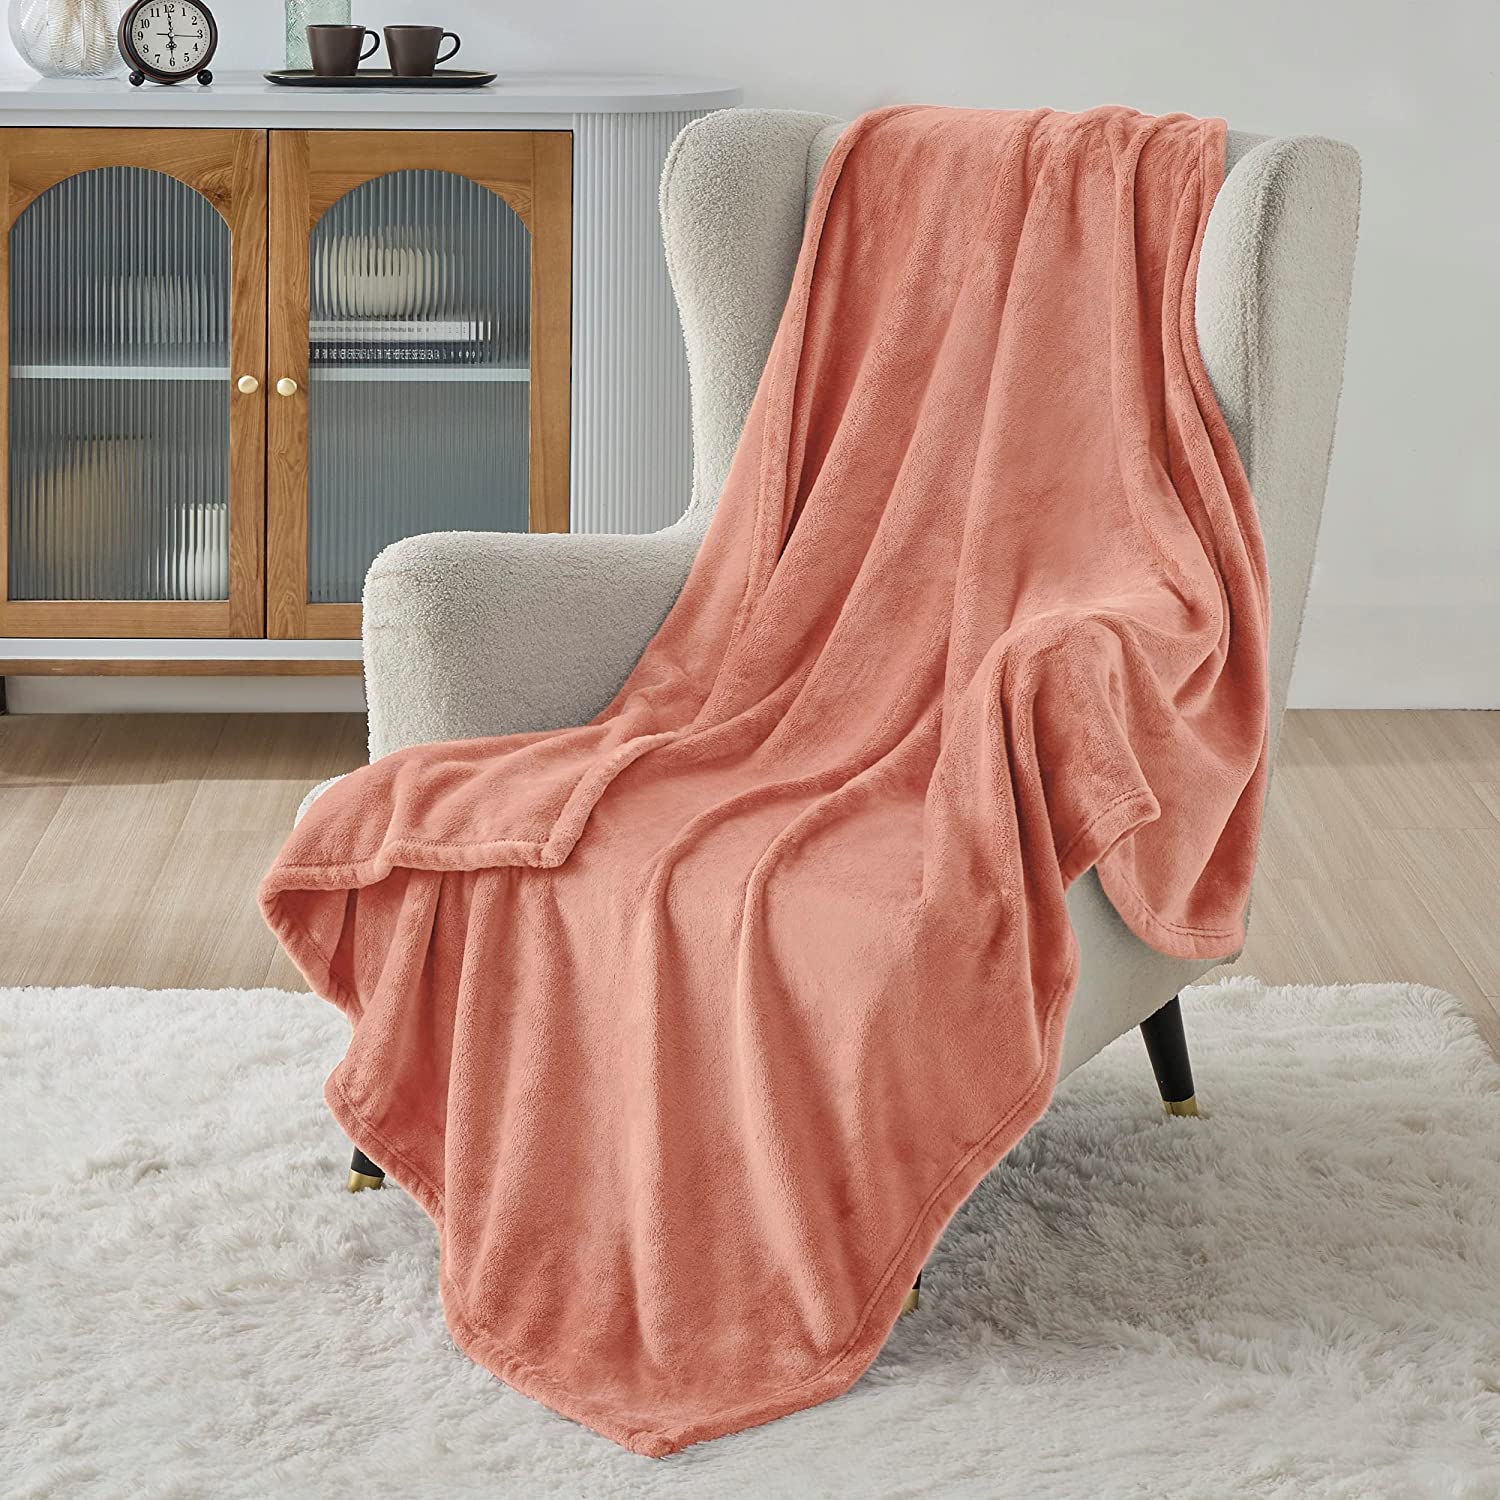  Catalonia Pink Coral Fleece Throw Blanket for Couch